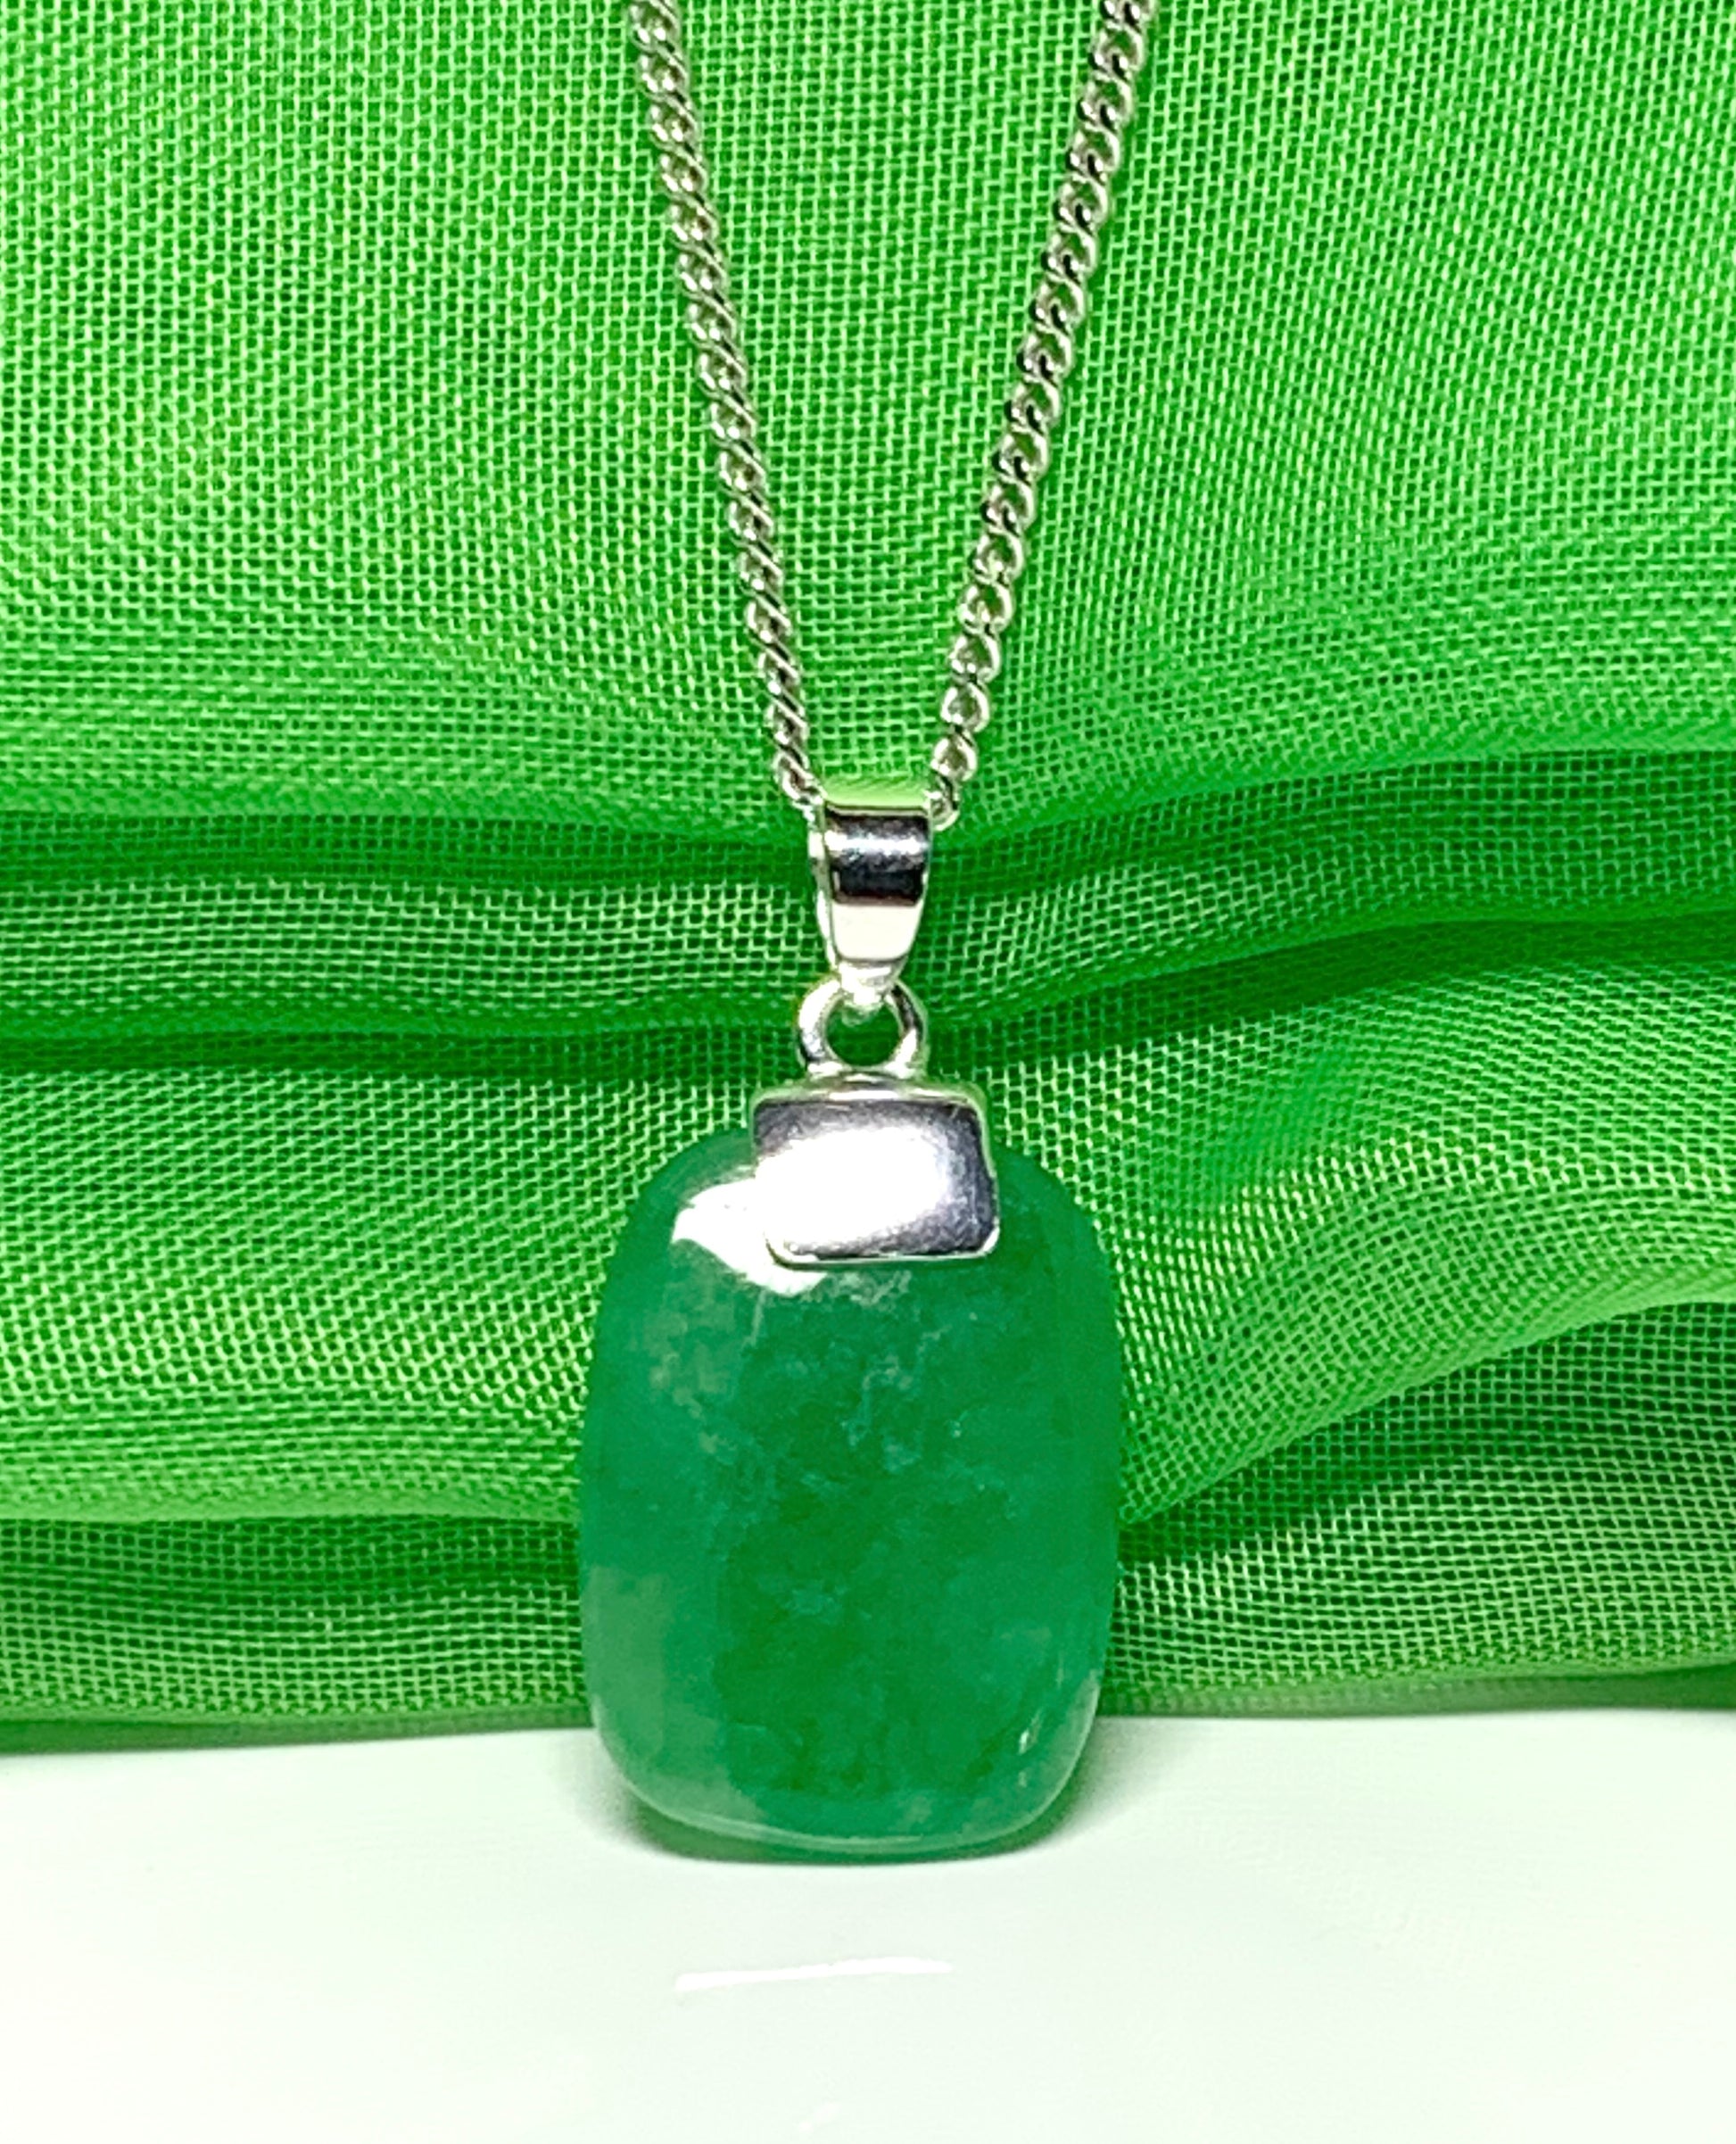 Pendant real cushion shaped green jade stone necklace sterling silver